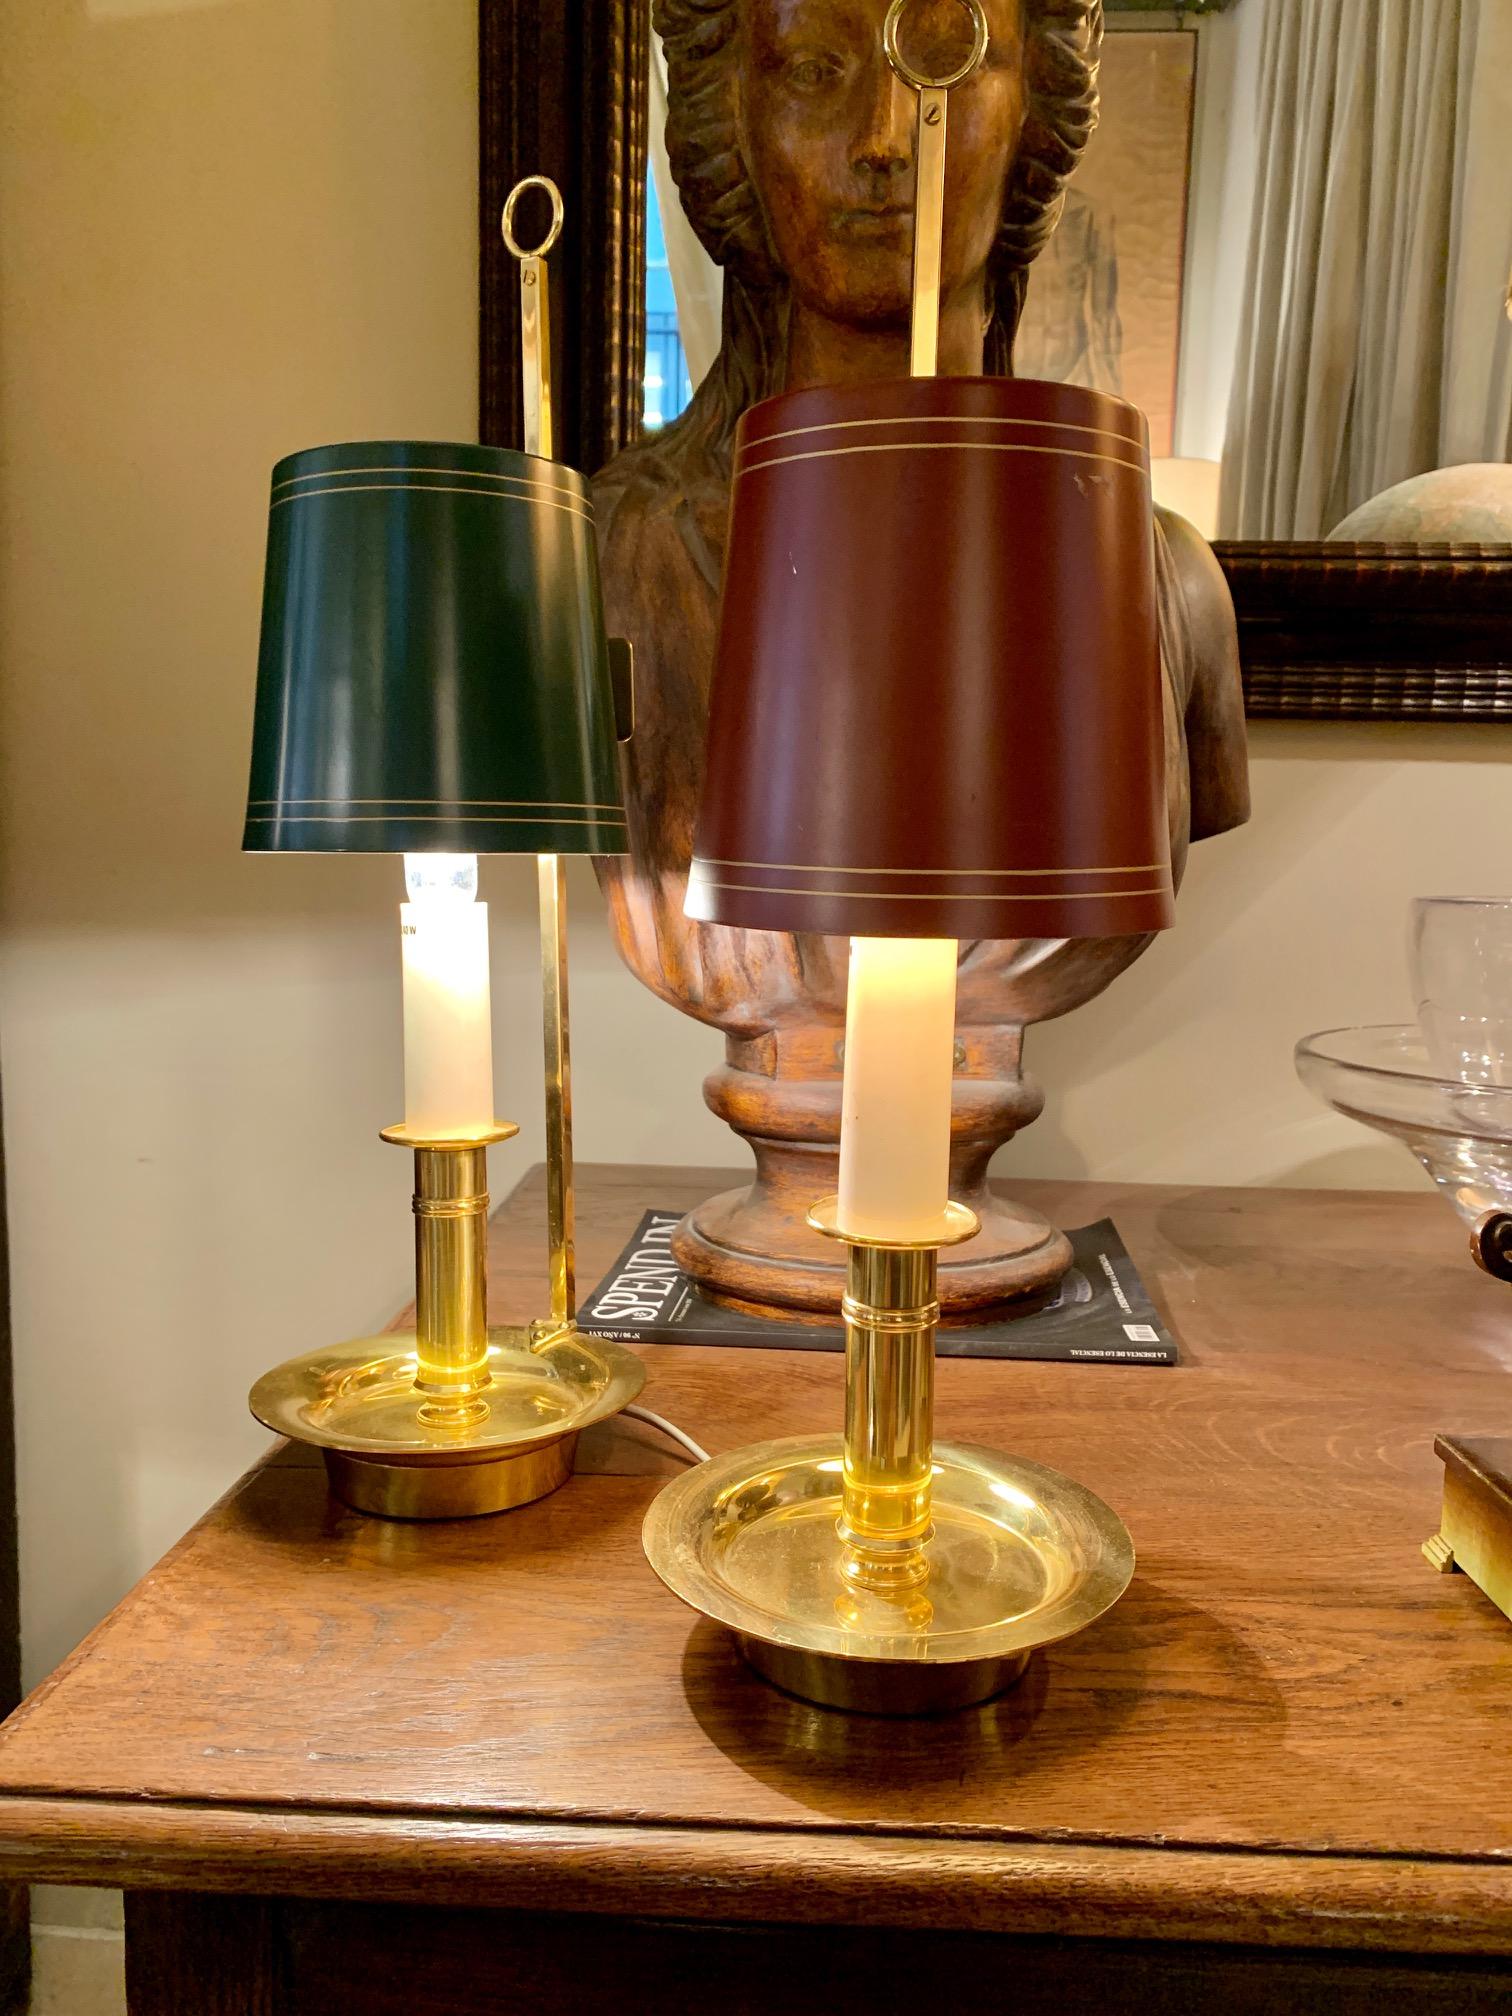 A pair of boullitte lamps, in gold brass and metal lampshade, can be used both to place them on a table and to hang them on the wall as a wall lamp.